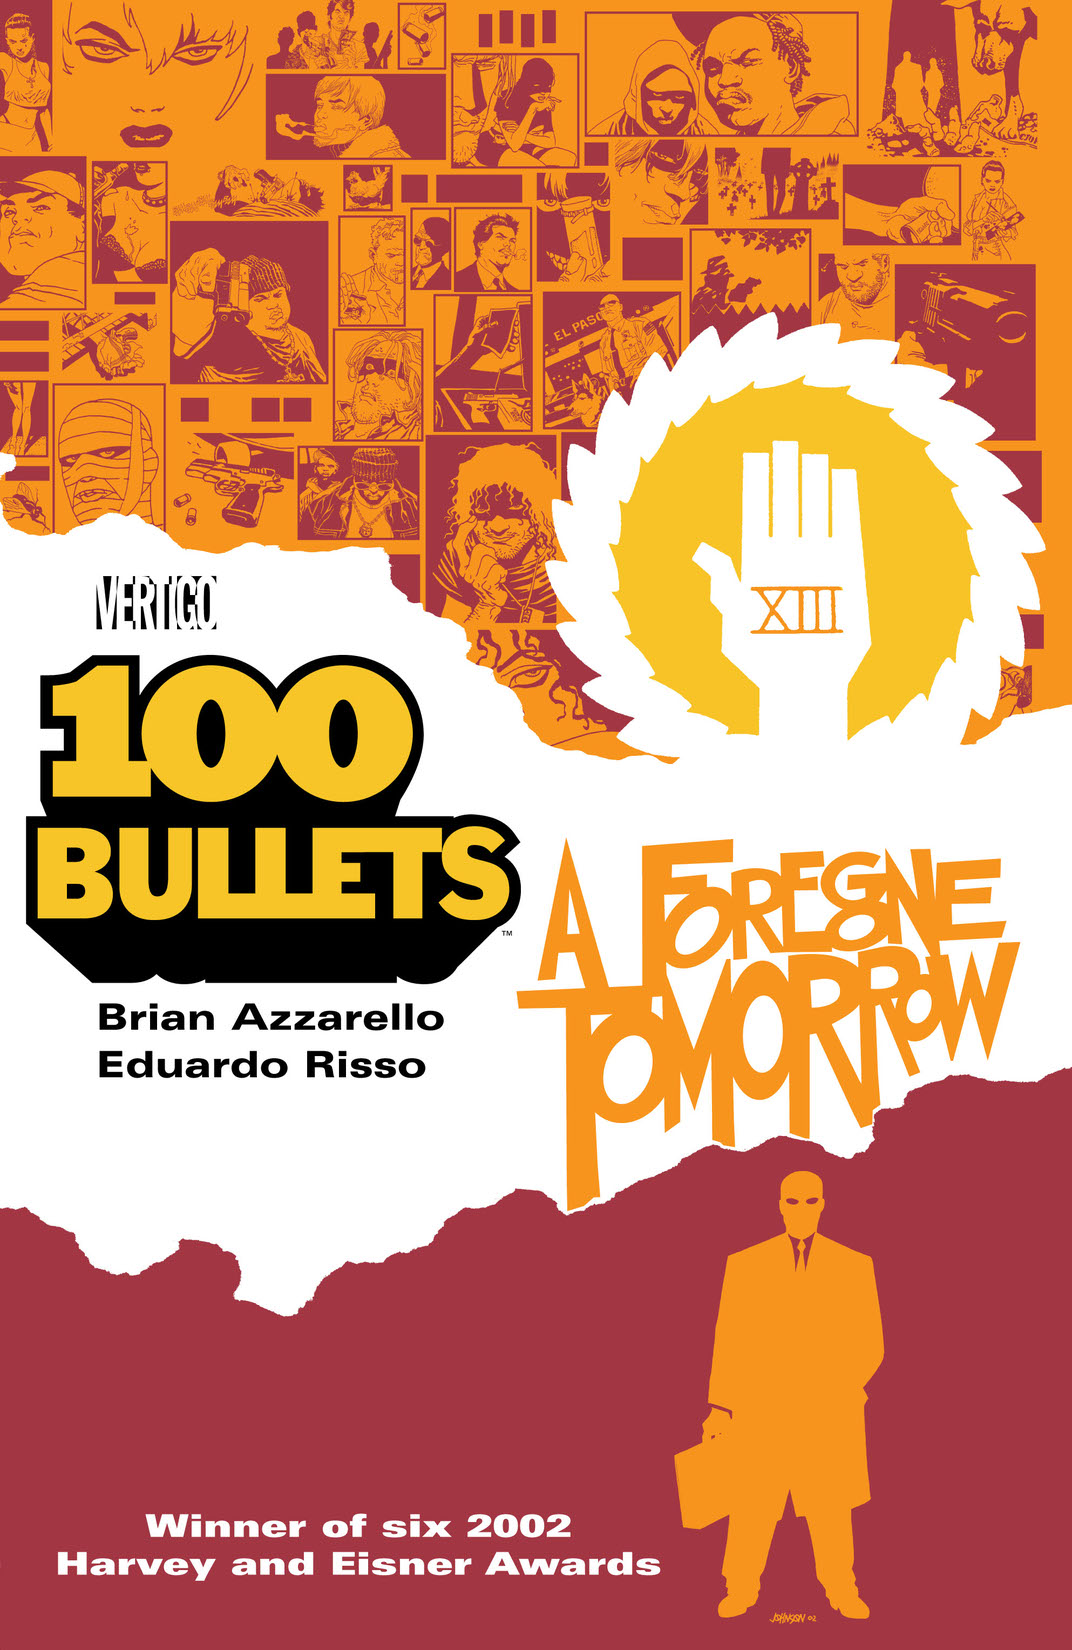 100 Bullets Vol. 4: A Foregone Tomorrow preview images